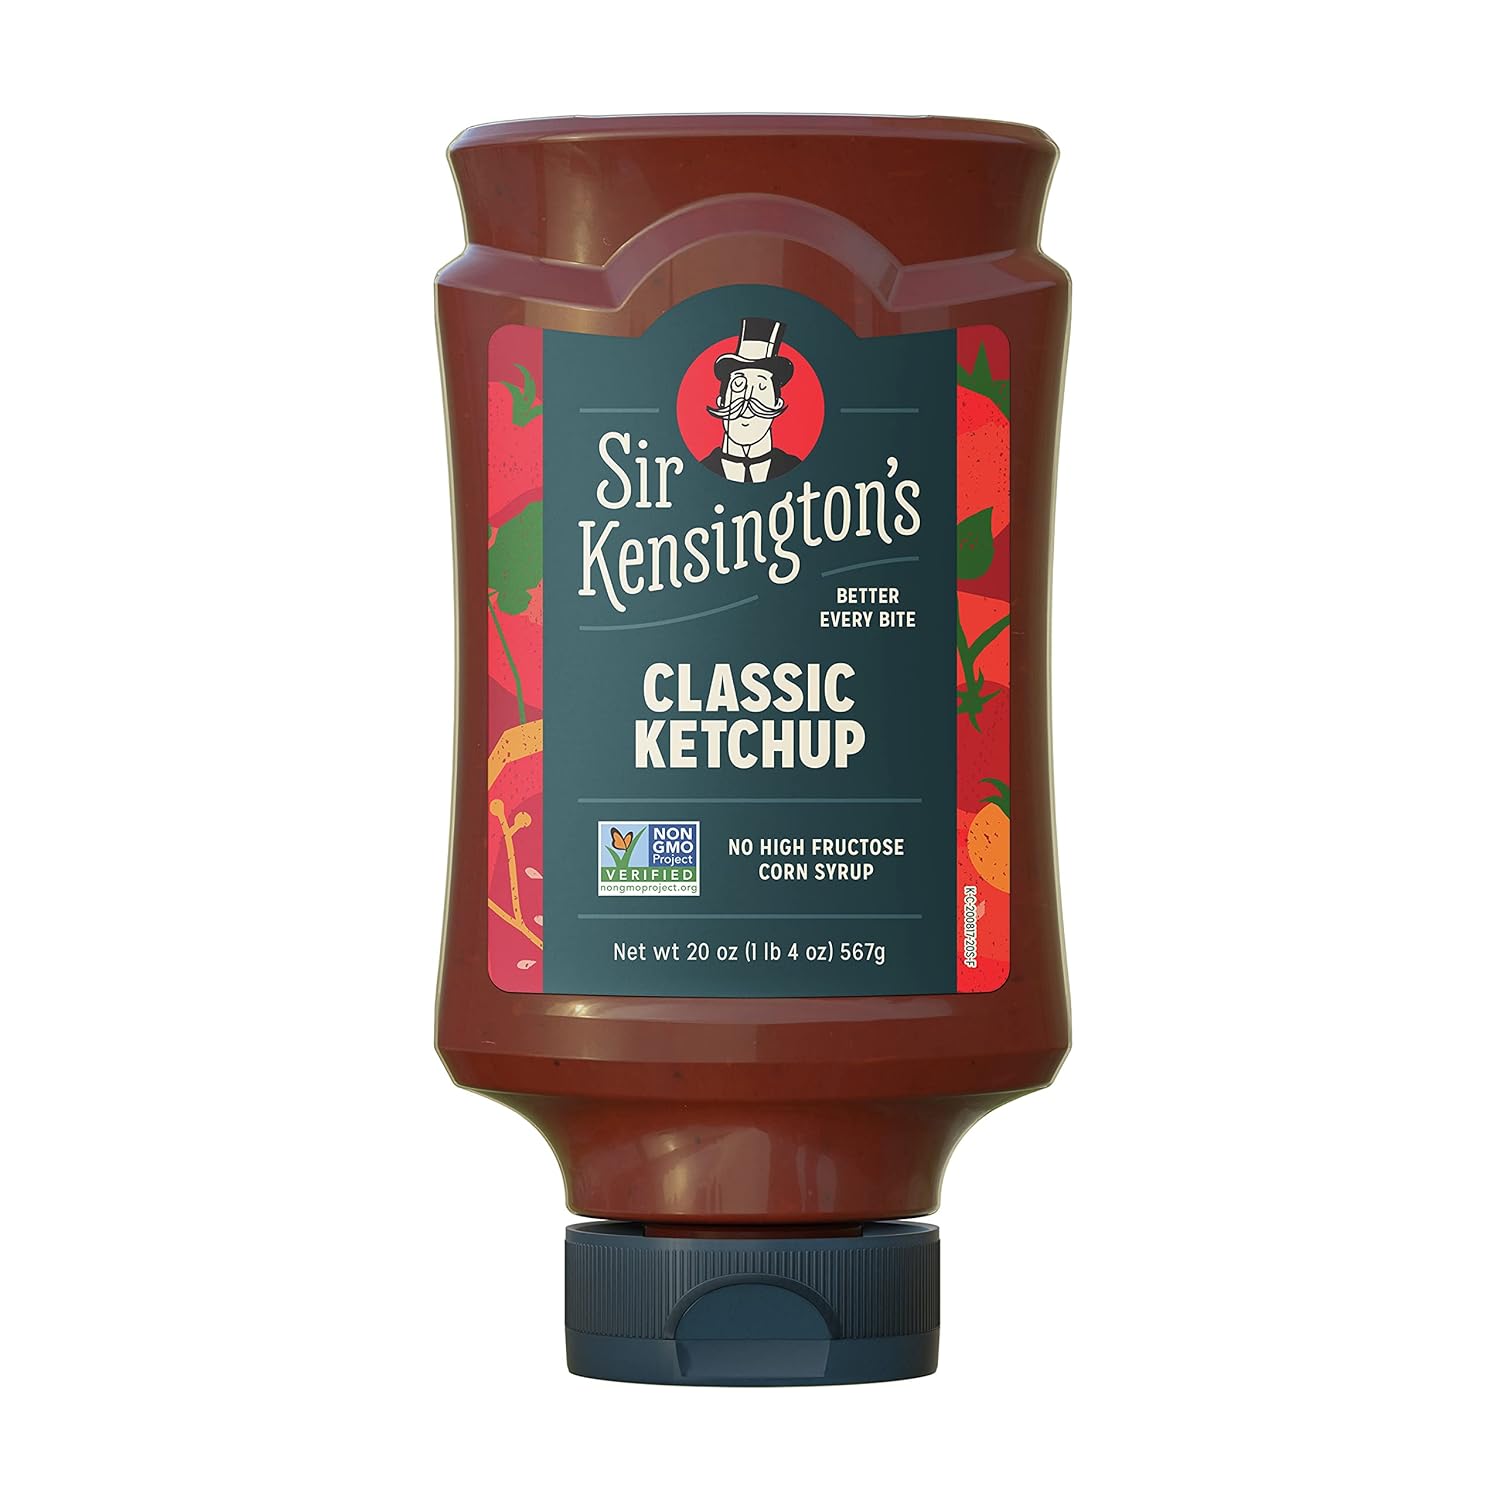 Sir Kensington's Classic Ketchup, From Whole Tomatoes, No High Fructose Corn Syrup, Gluten Free, Certified Vegan, Non- GMO Project Verified,...